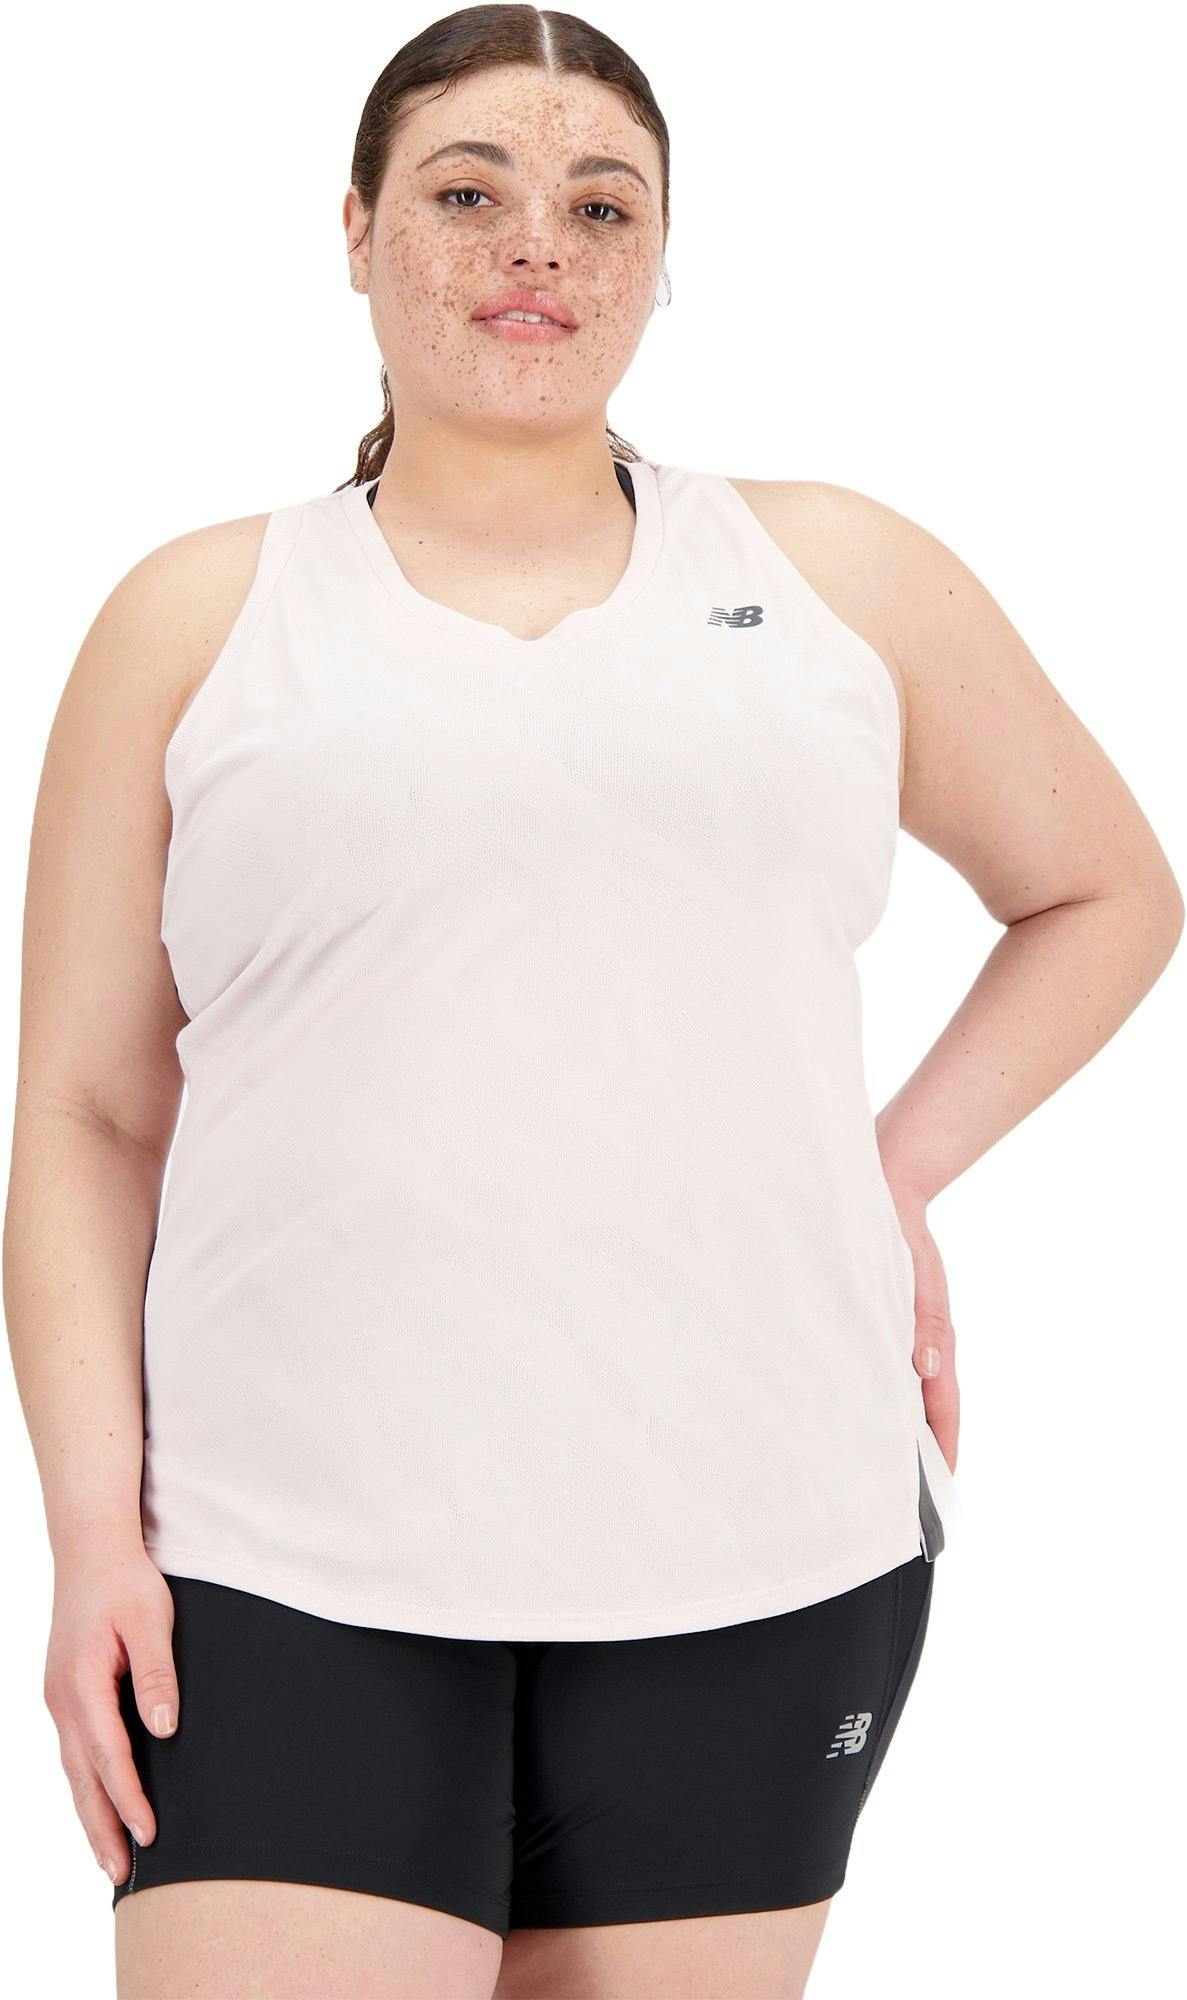 Product image for Q Speed Jacquard Tank - Women's